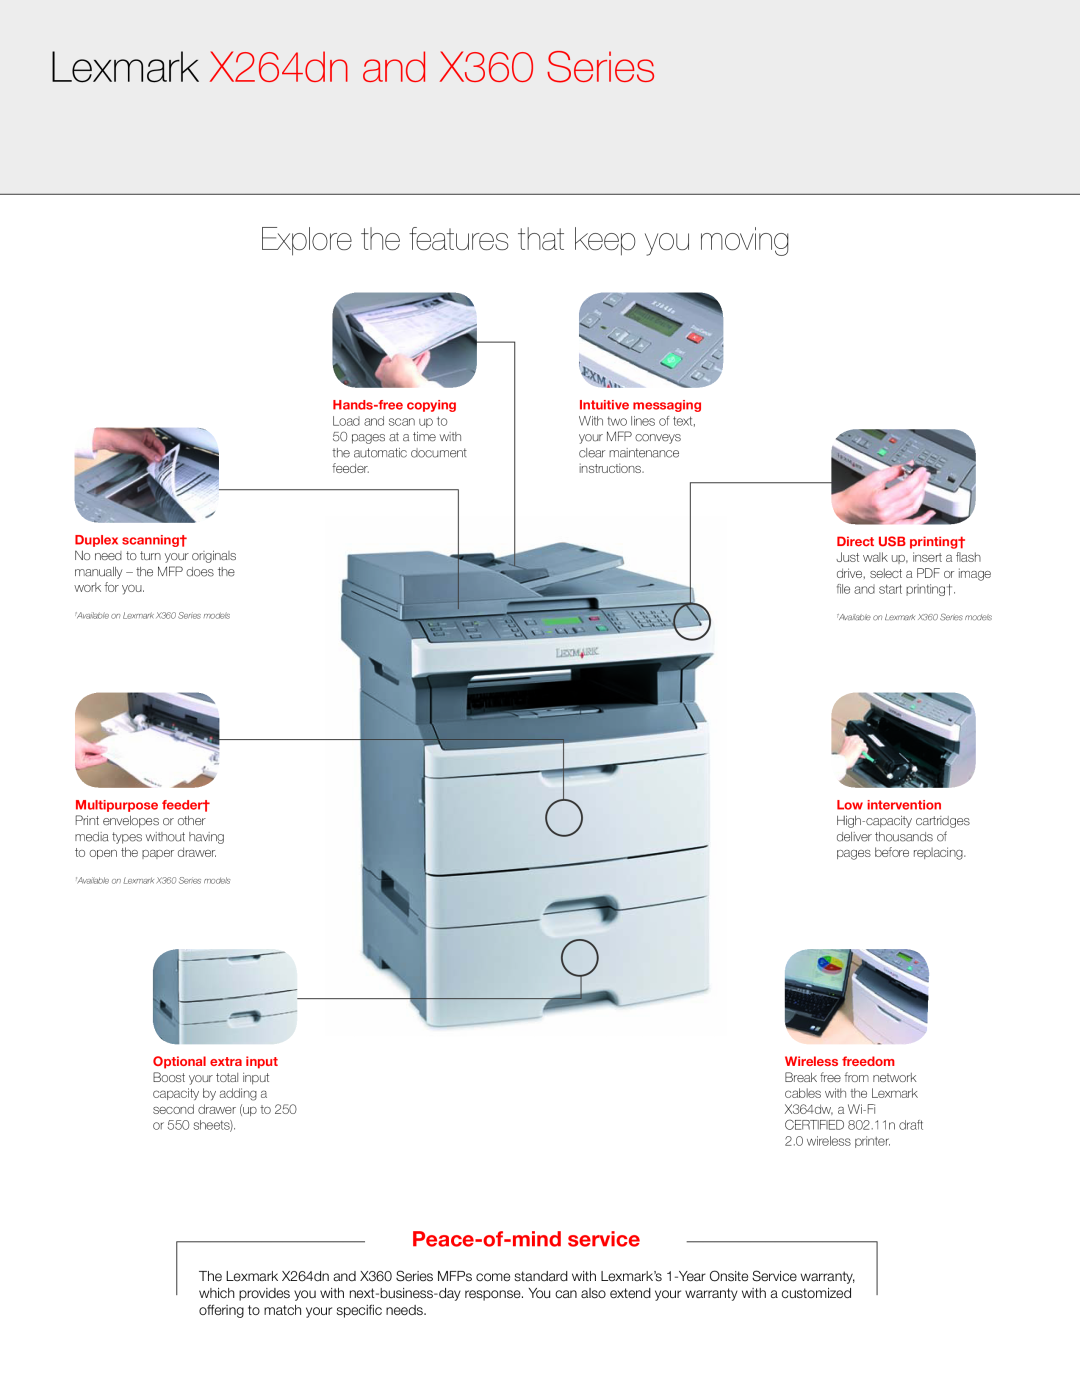 Lexmark X364dn, 13B0501 Explore the features that keep you moving, Lexmark X264dn and X360 Series, Peace-of-mindservice 